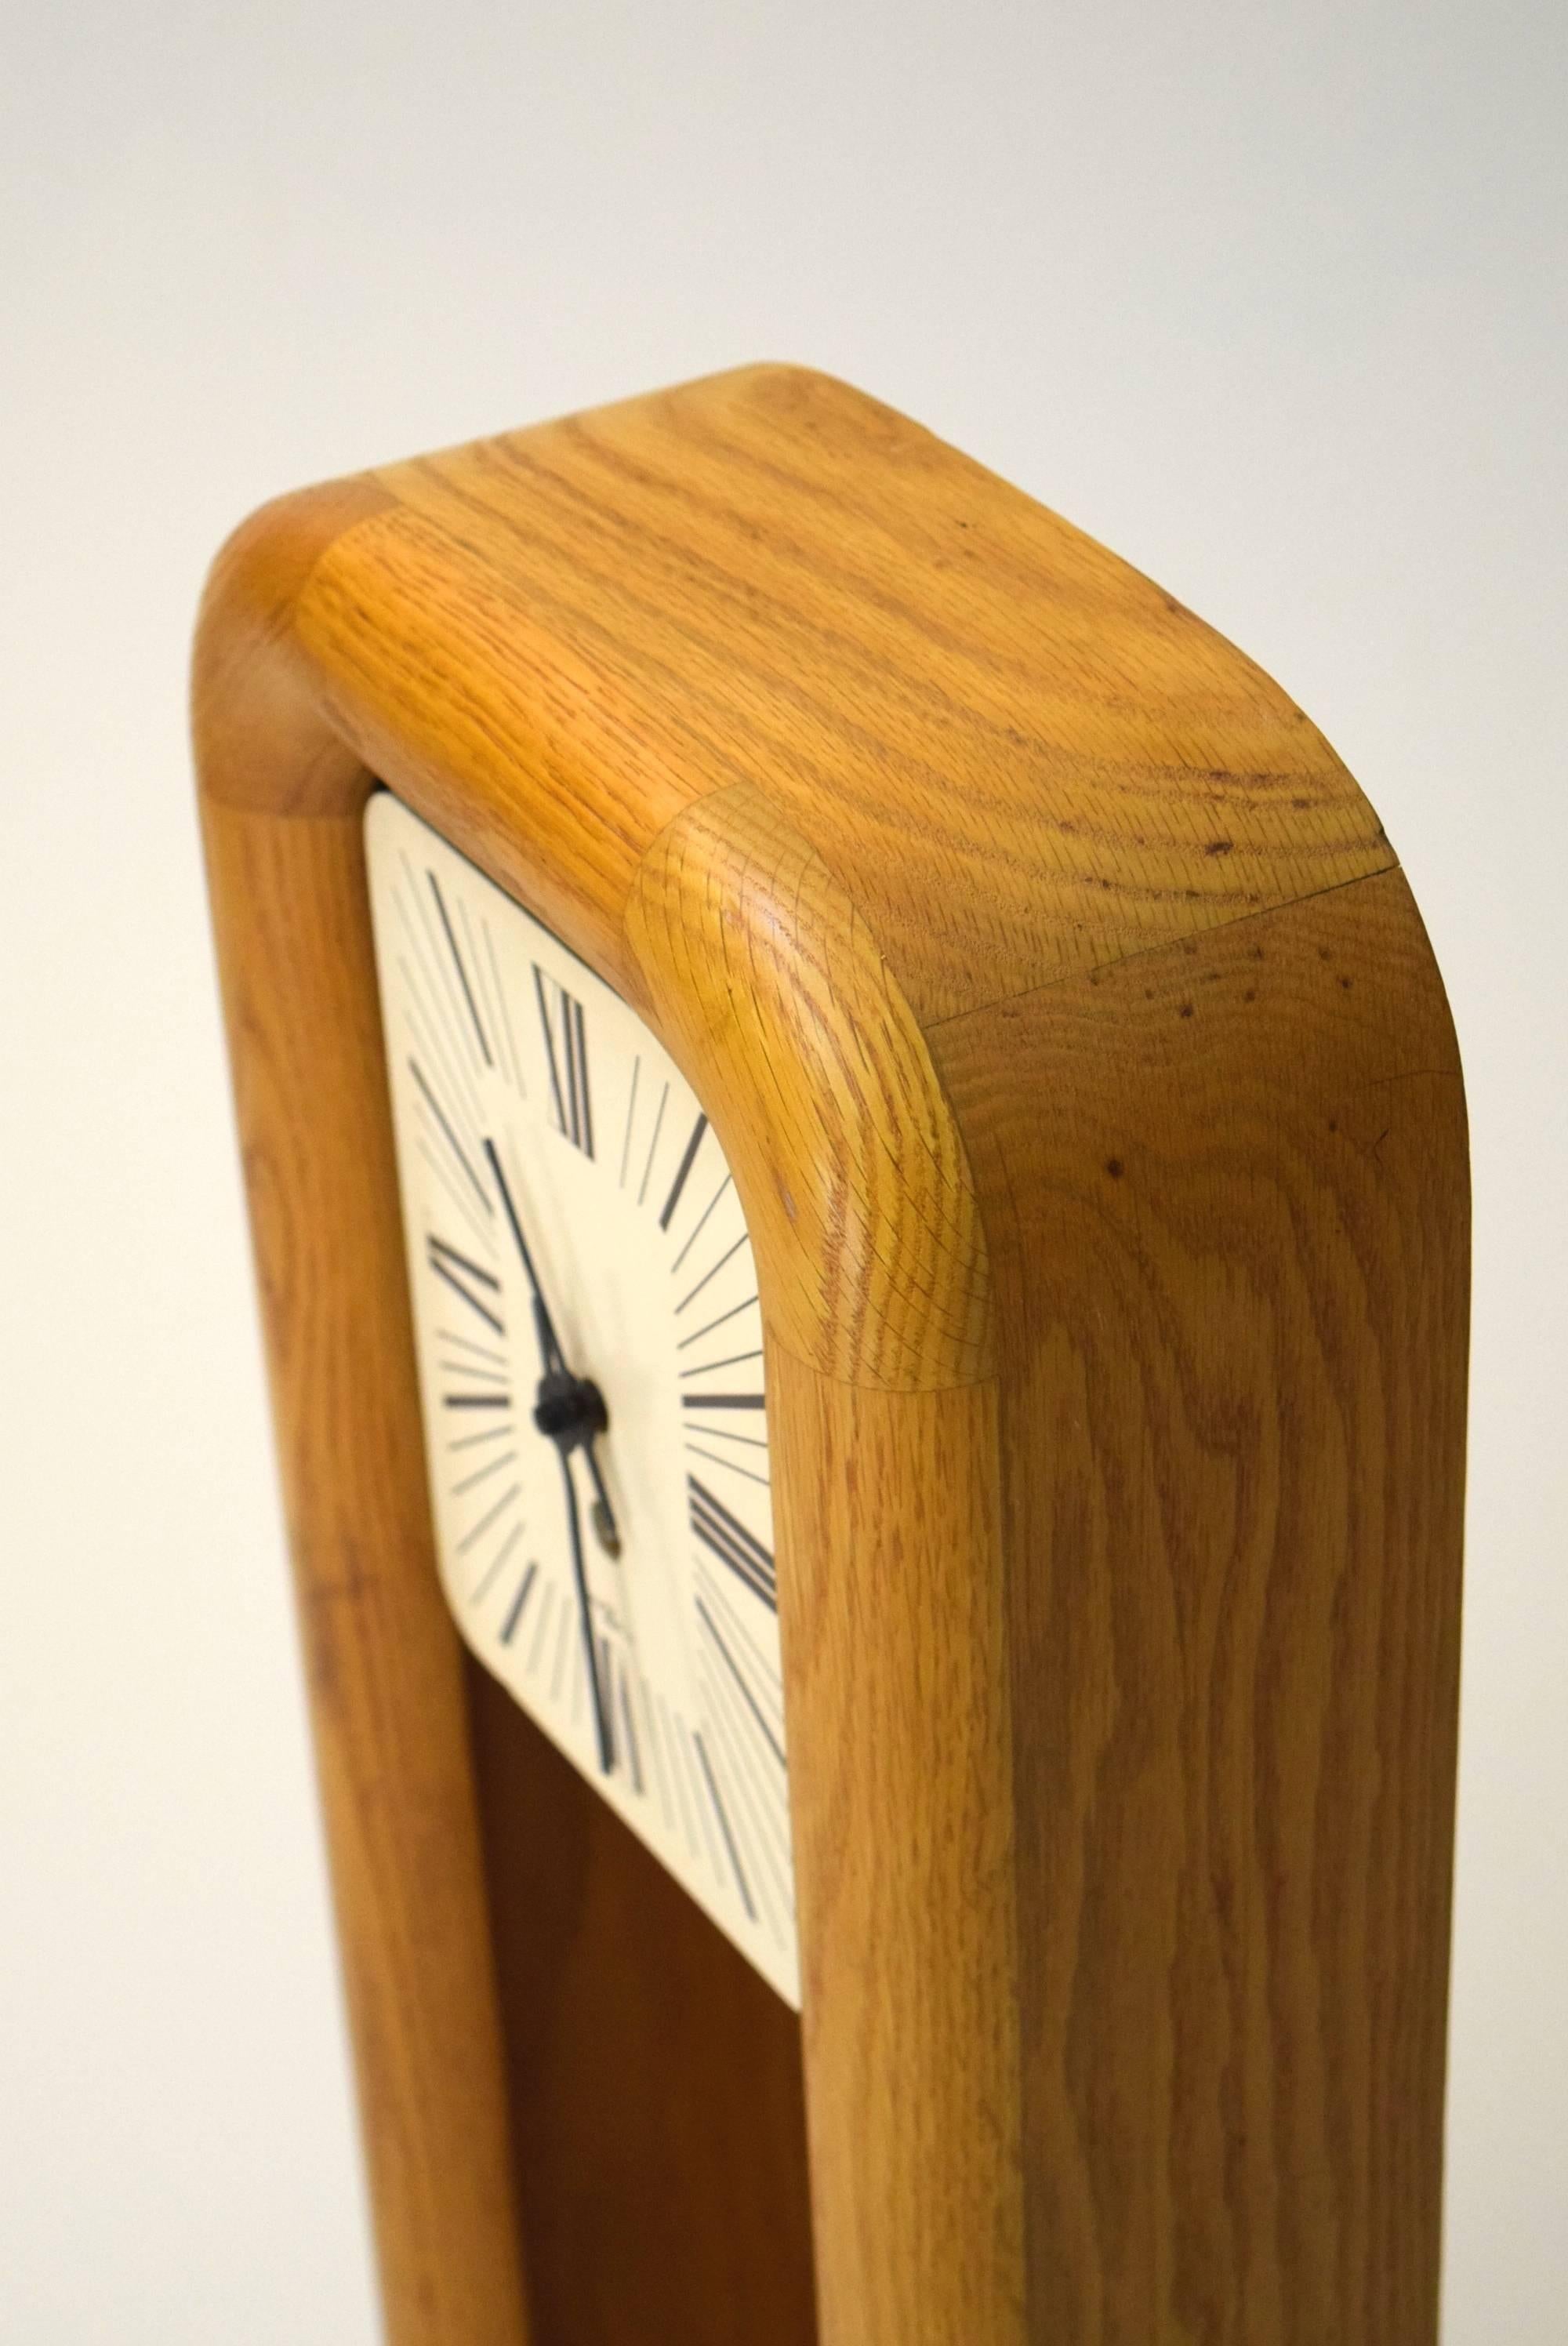 
Clock by Howard Miller with design by Arthur Umanoff.

A heavy grandfather style wall hanging clock produced of solid oak and is 
operated by a key. All original. It can also be used as a mantel clock. 
This clock measures 34